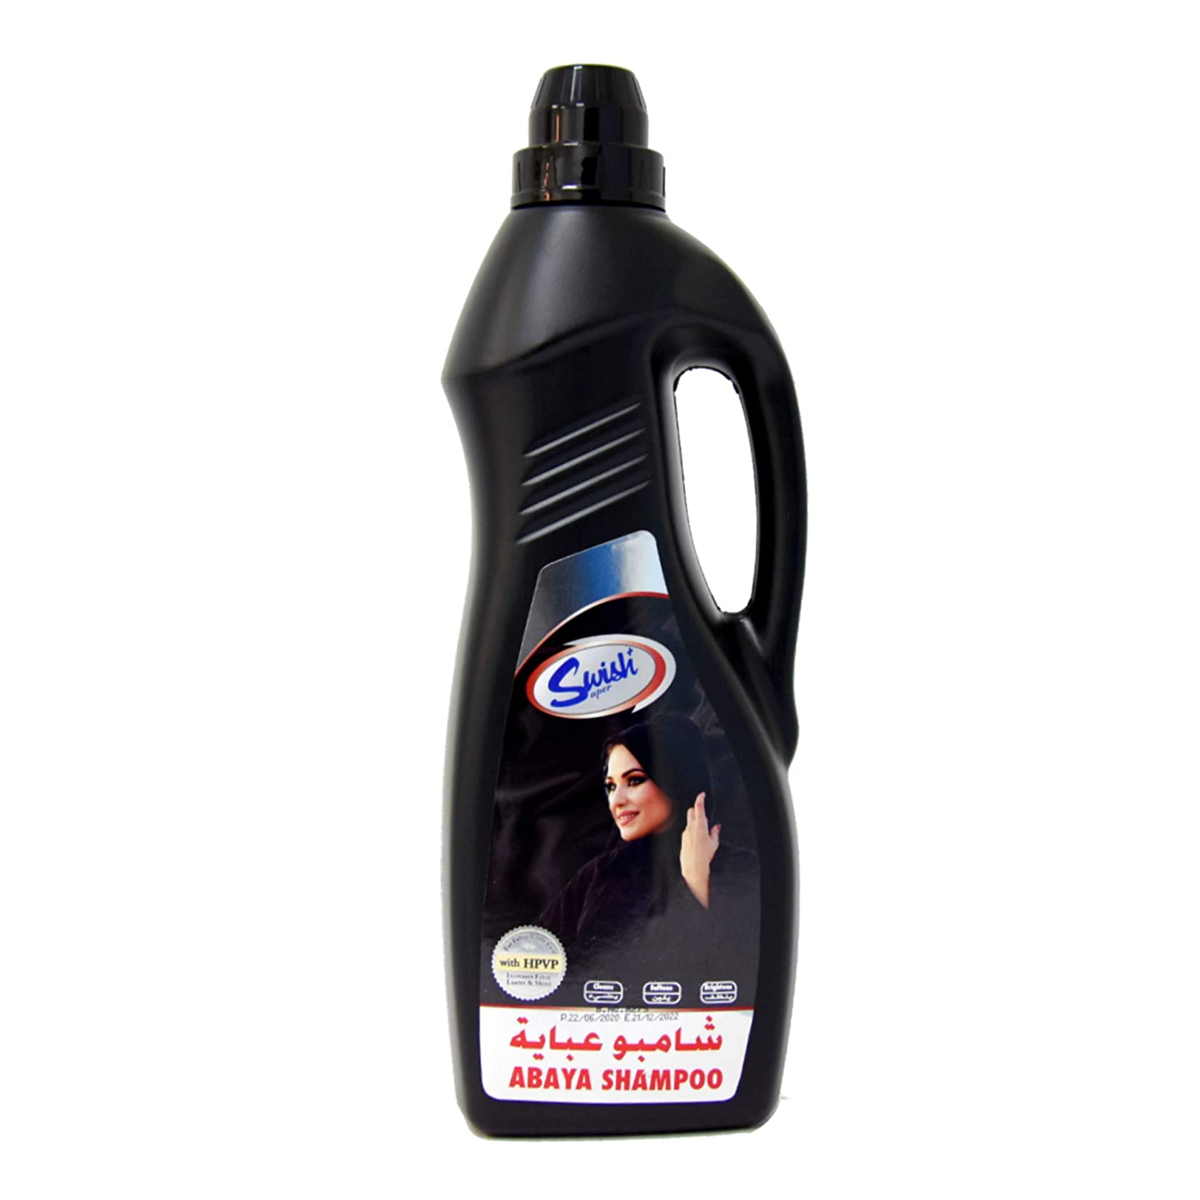 Swish Abaya Shampoo, For fabric color care with HPVP, Increase Fibre Lustre & Shine. 1L